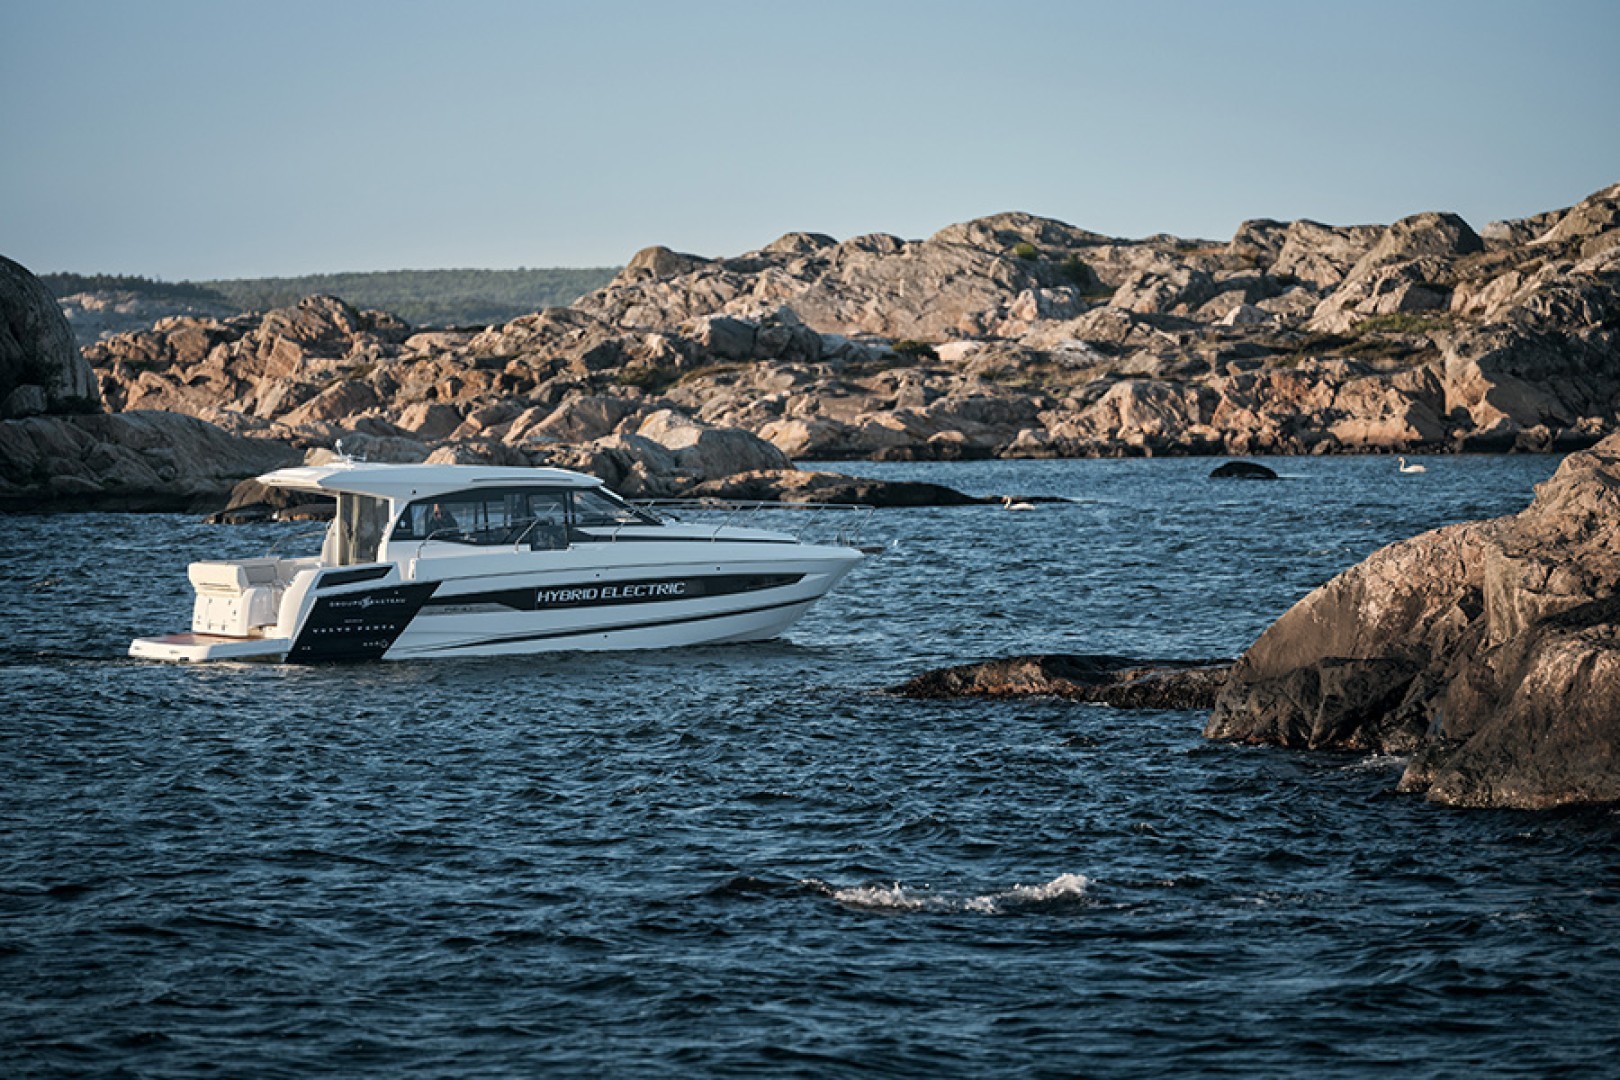 Volvo Penta and Groupe Beneteau share data-driven insights into future hybrid electric experience